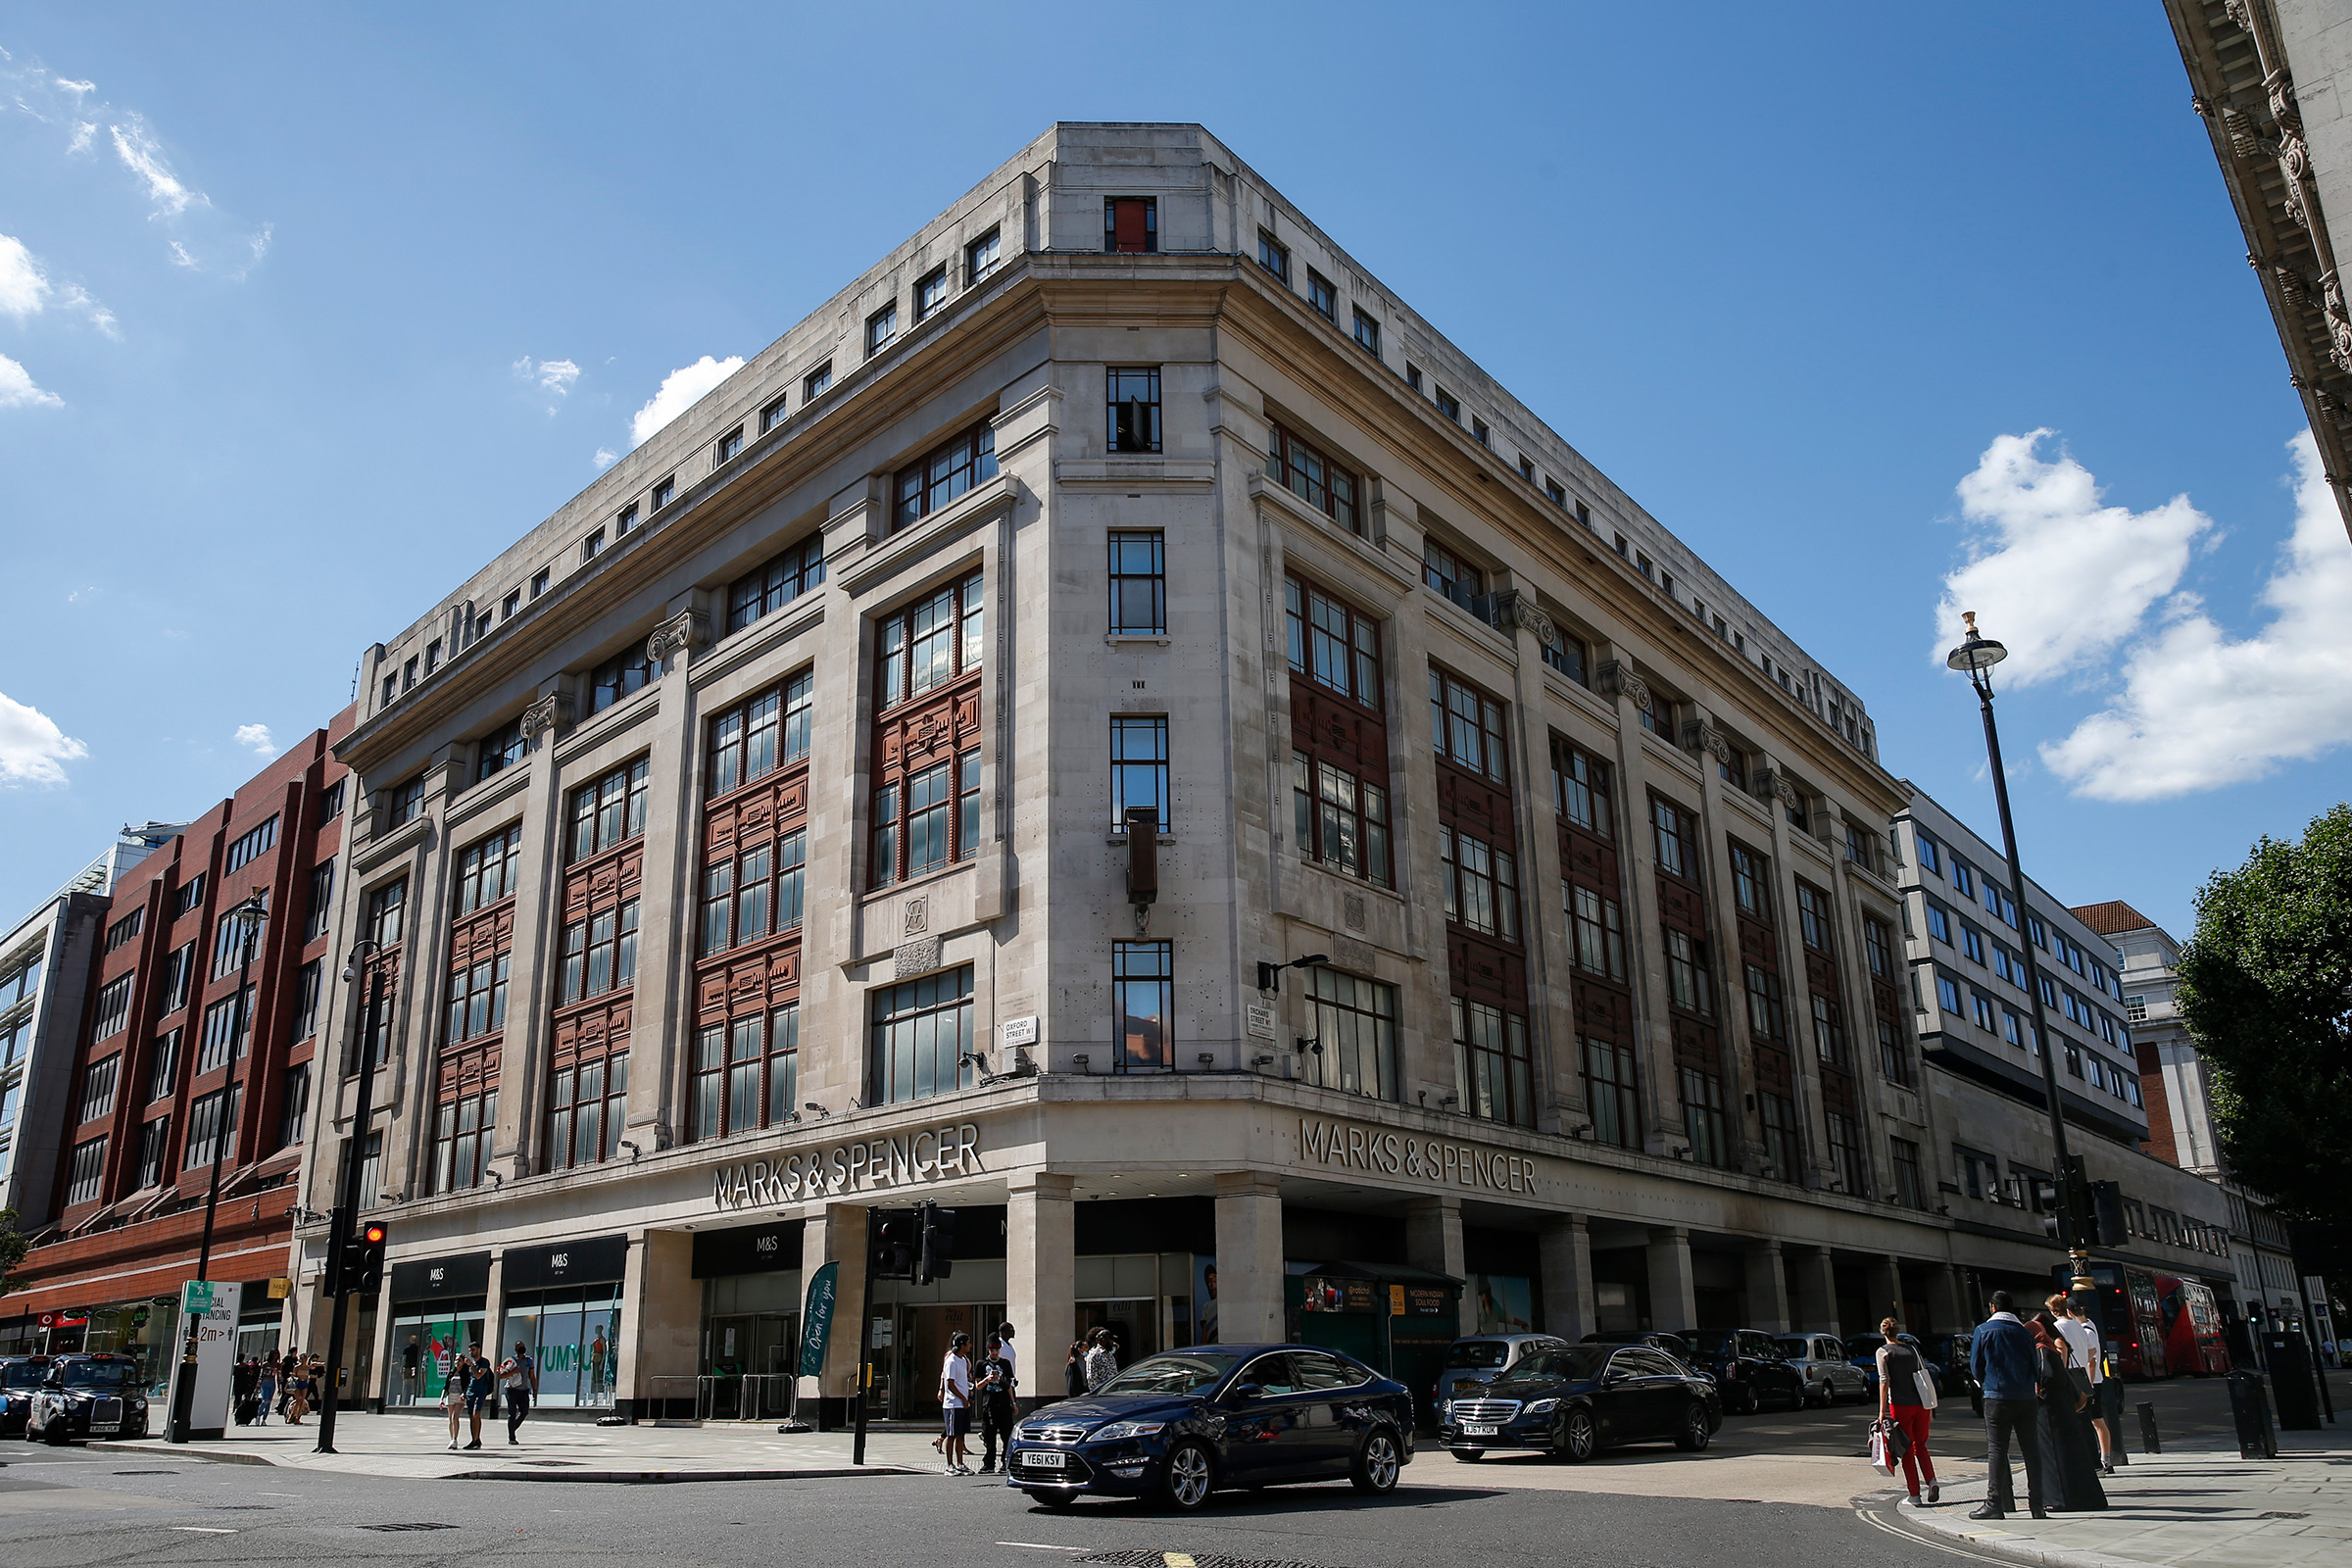 The Marks & Spencer store on Oxford Street in London, on July 20, 2020. (Hollie Adams—Getty Images)